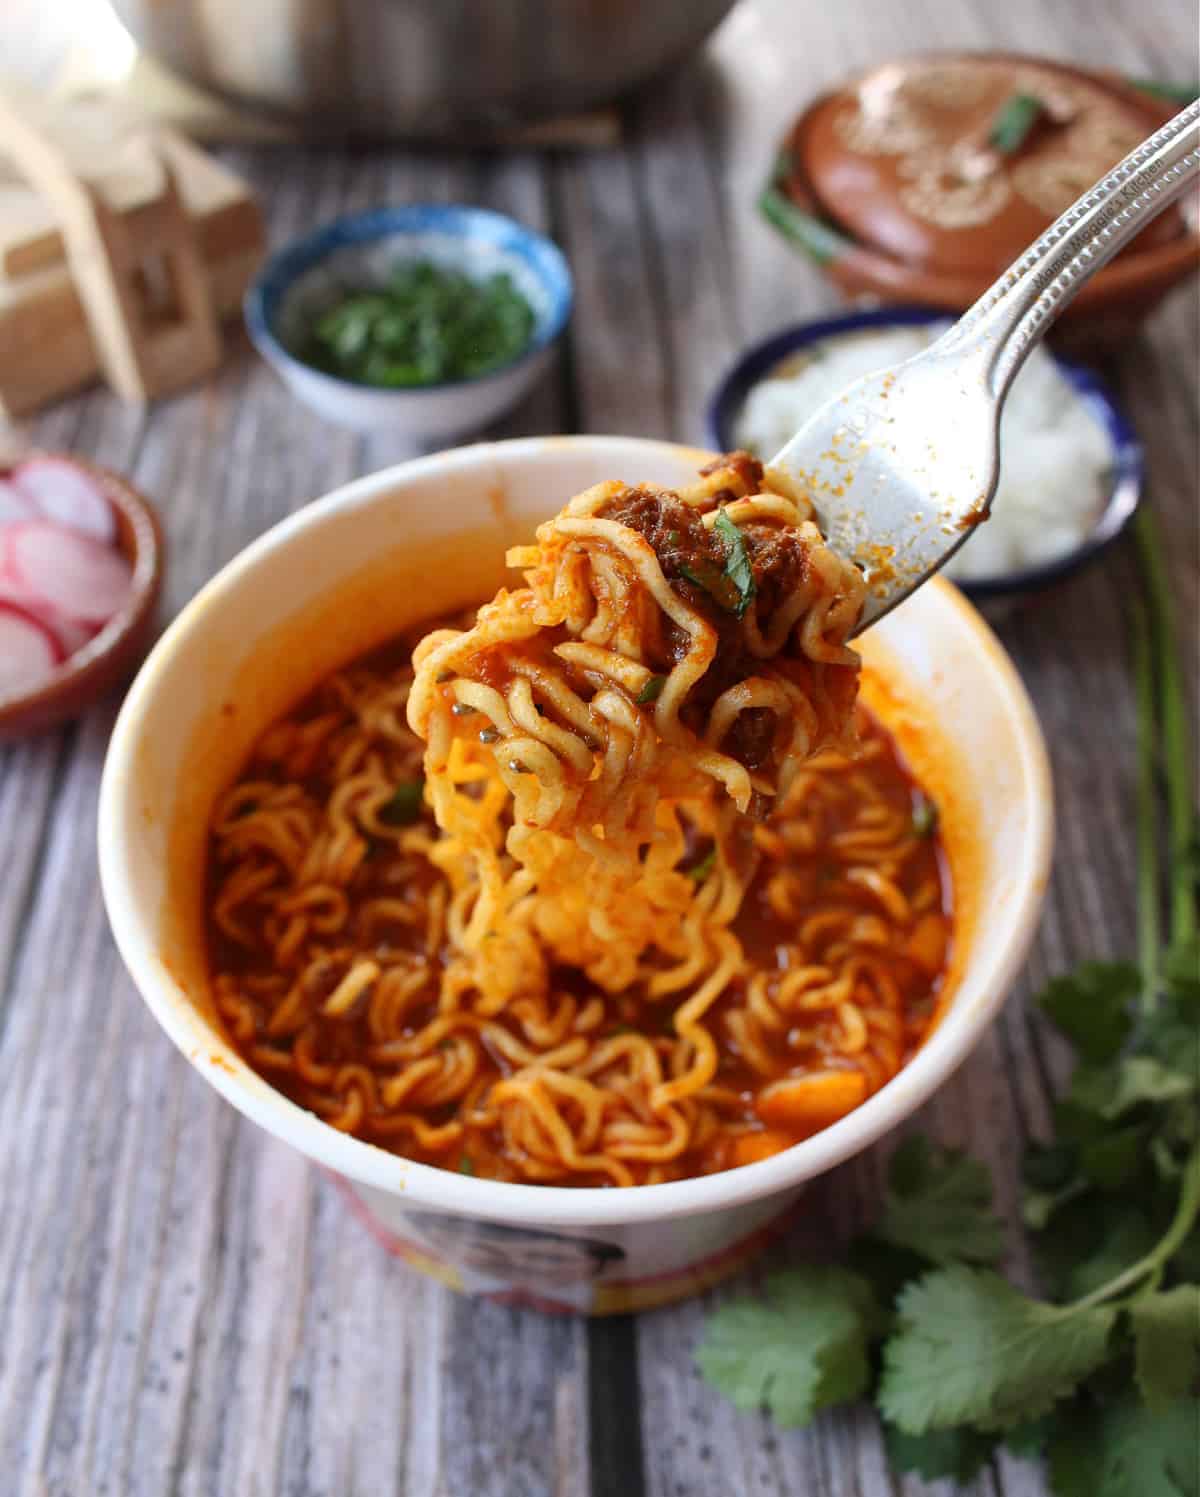 A fork holding birria ramen surrounded by the toppings.